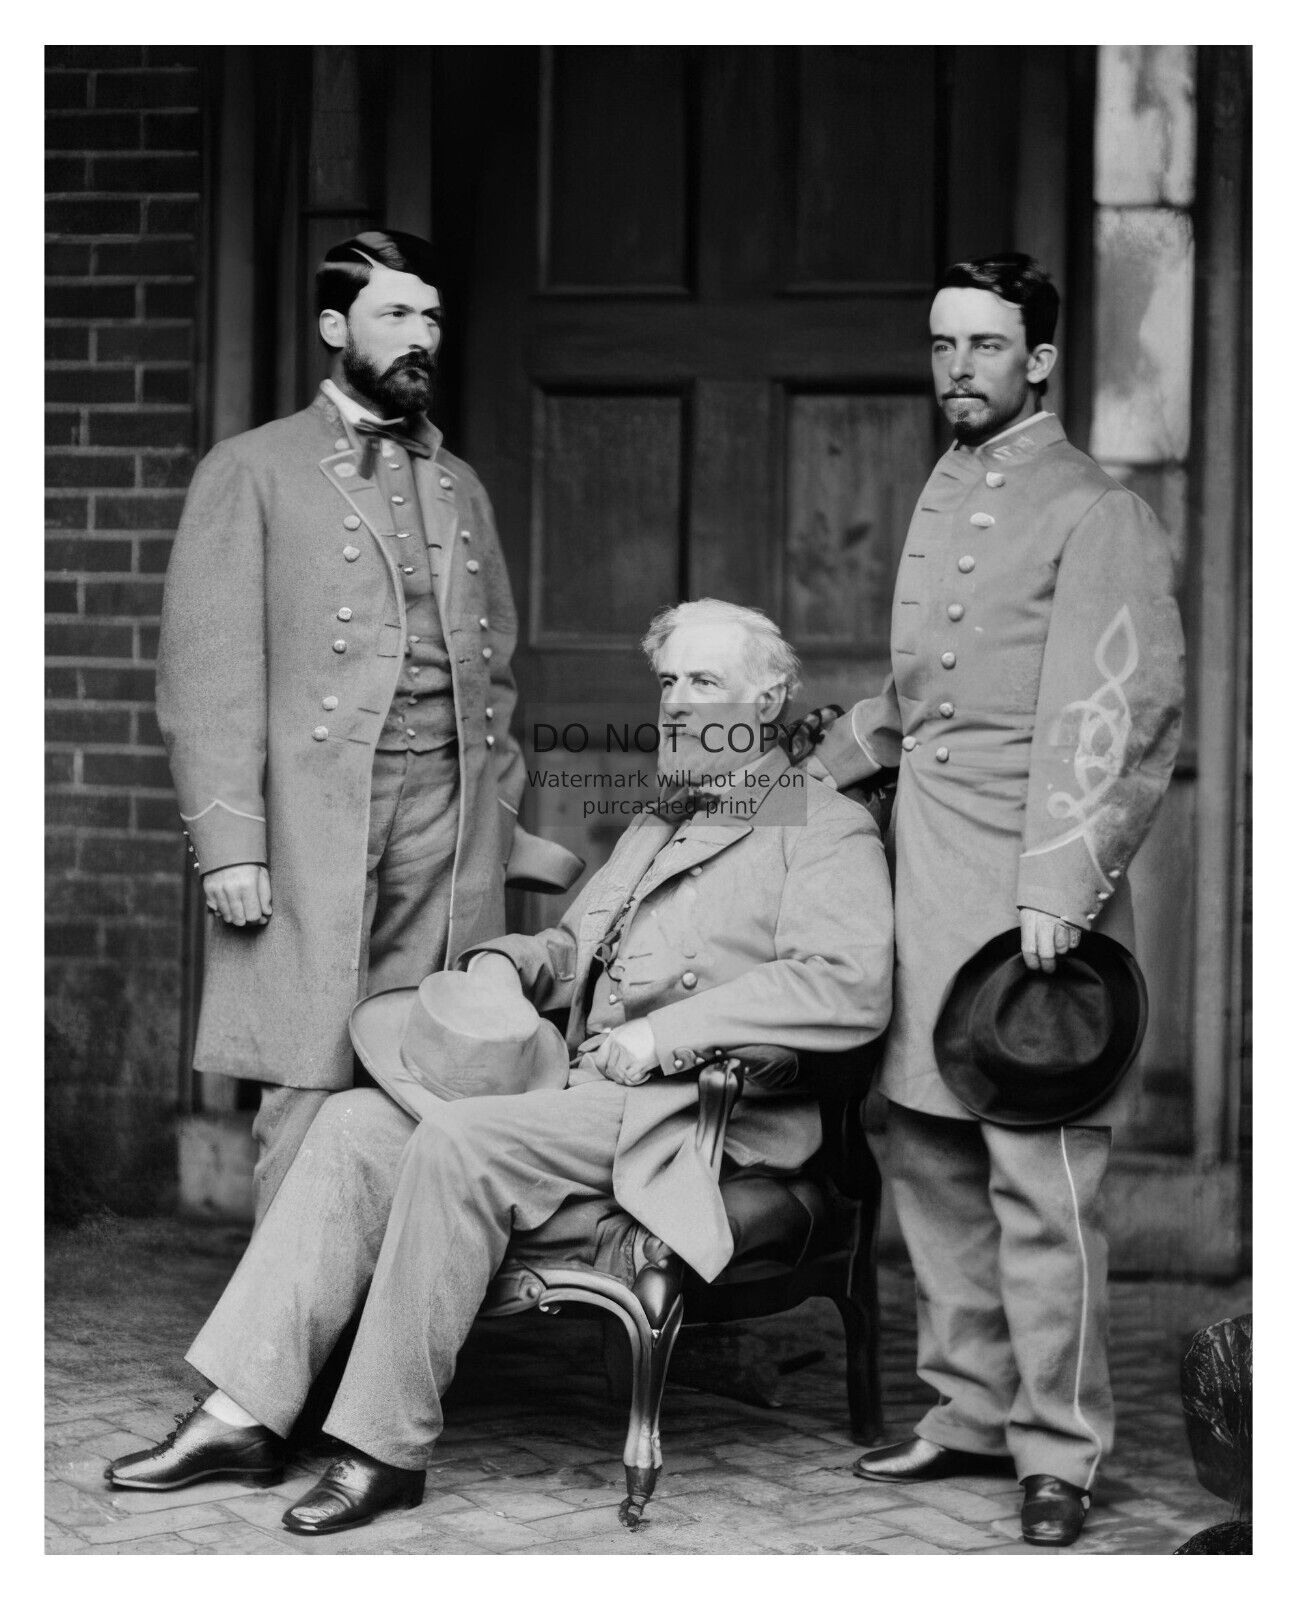 ROBERT E. LEE CONFEDERATE CIVIL WAR GENERAL WITH HIS SONS 1865 8X10 B&W PHOTO